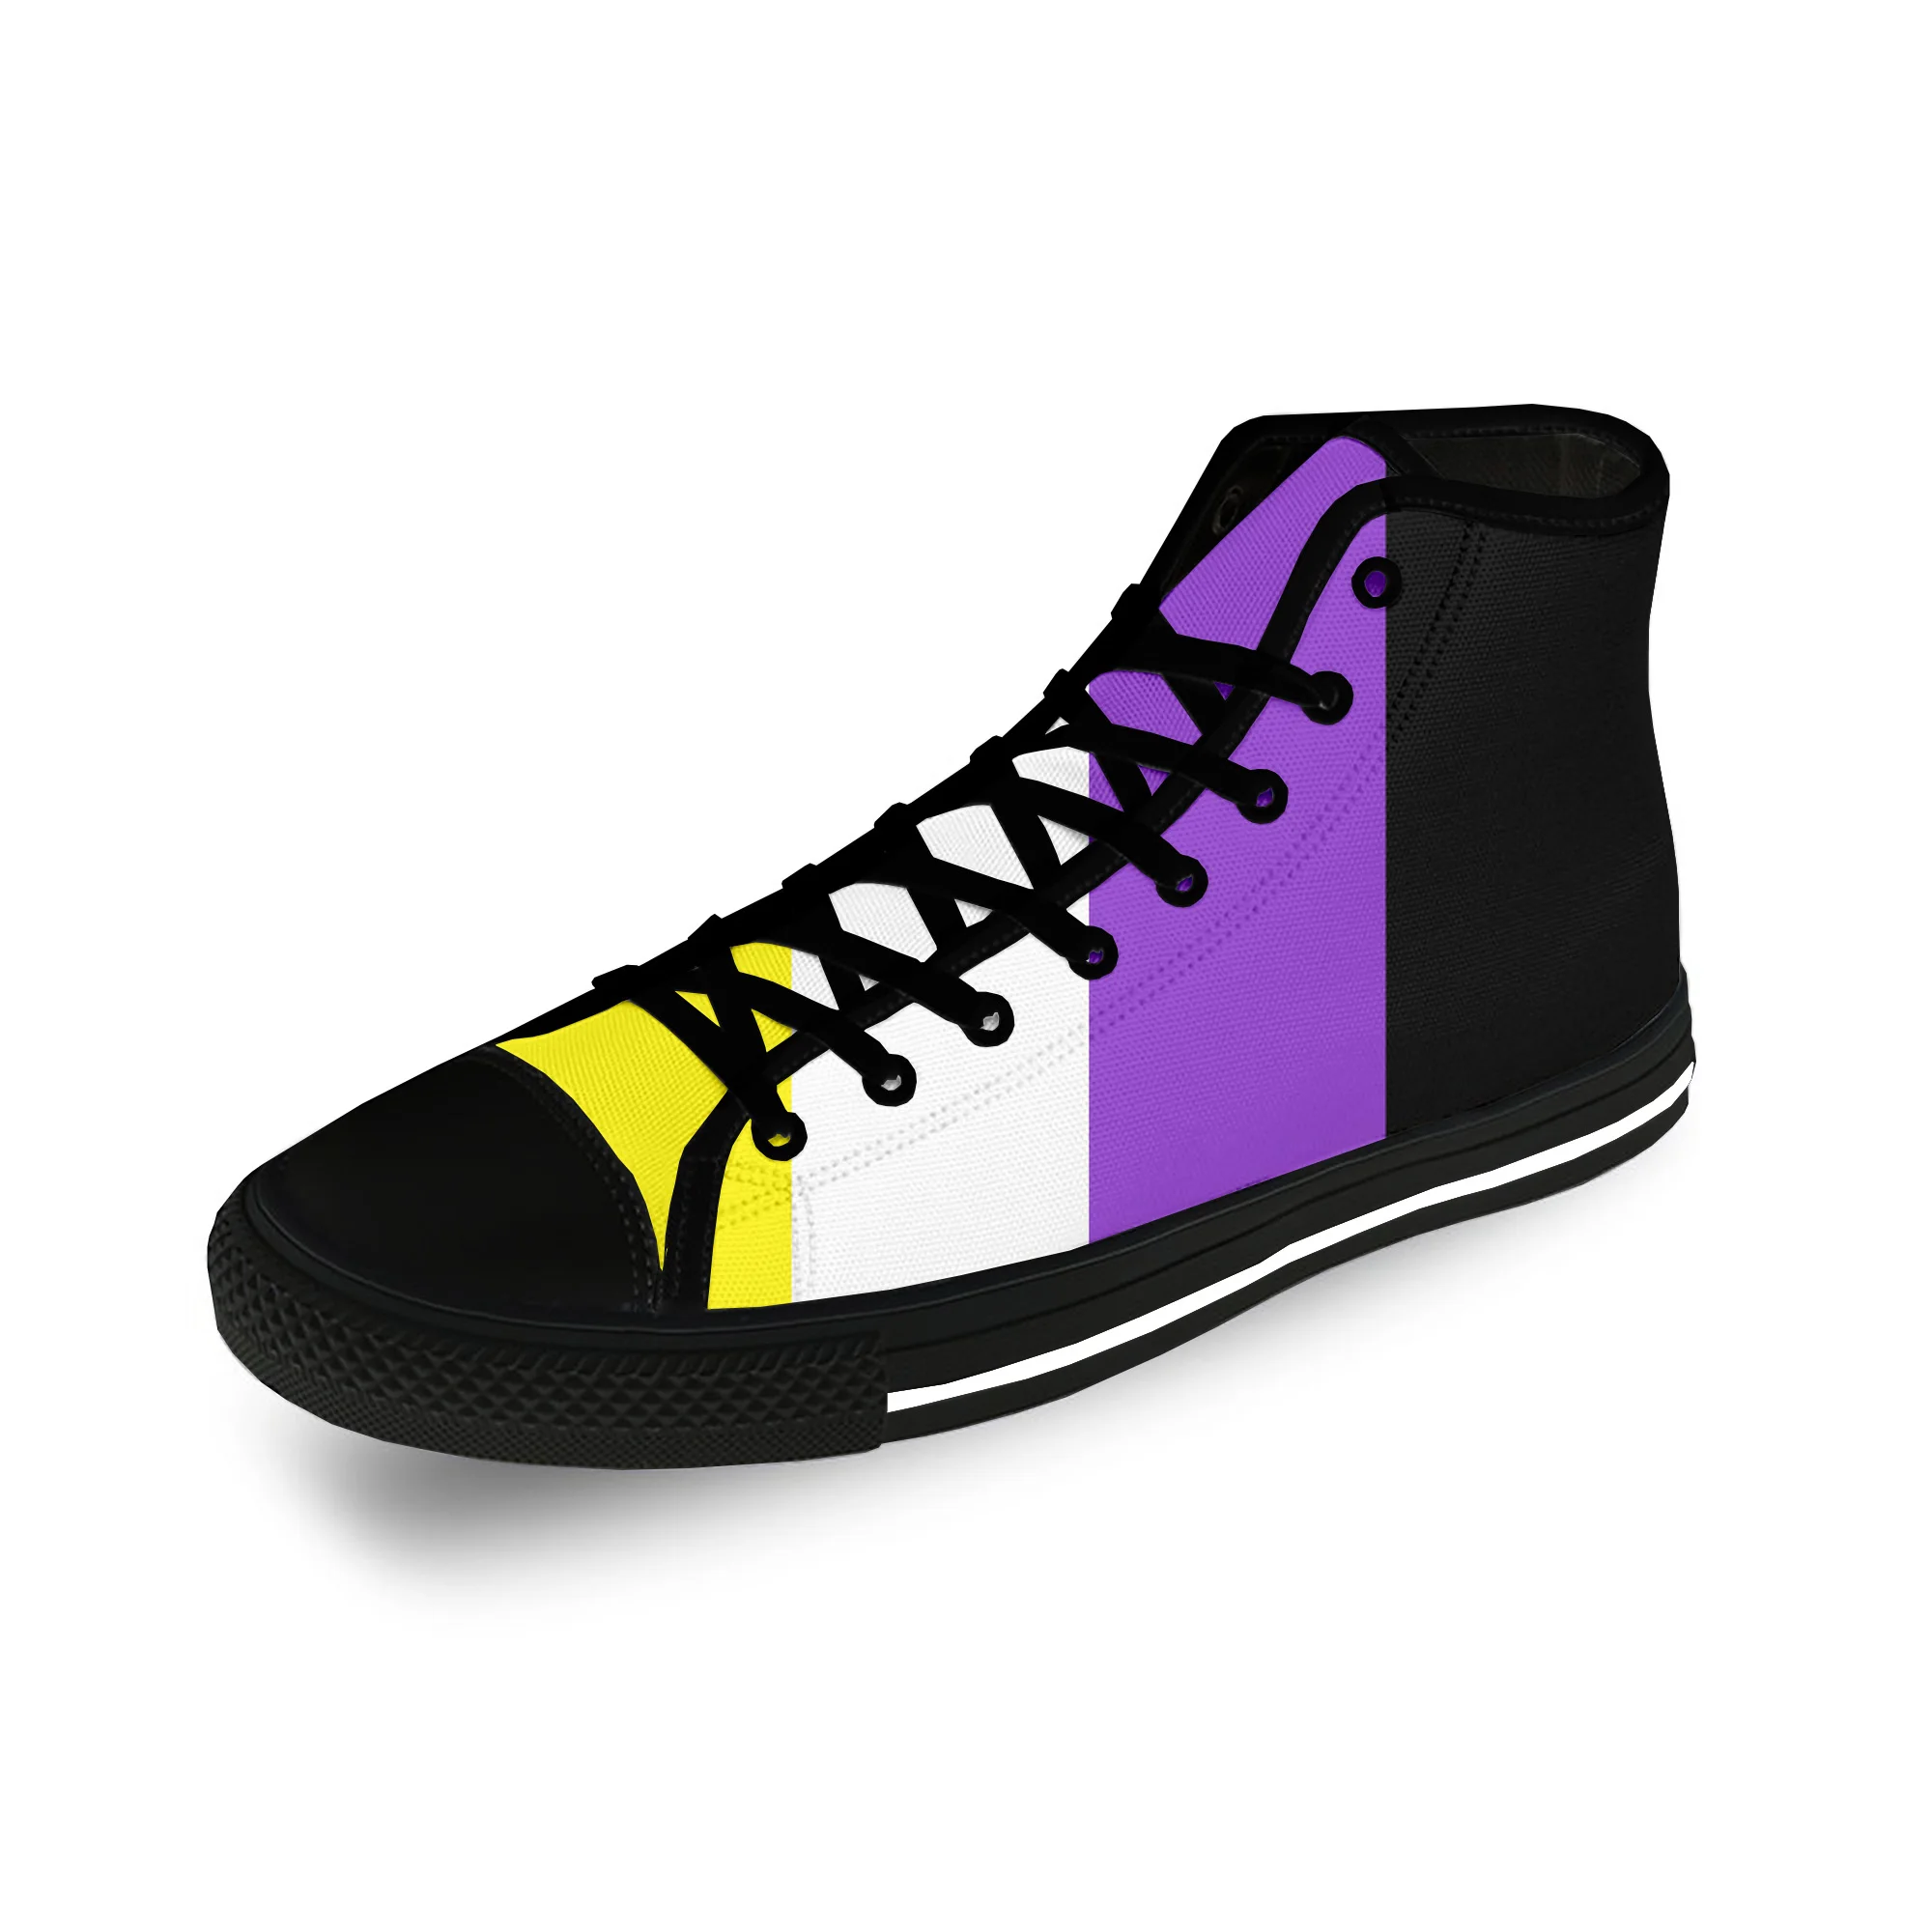 Non binary Flag Enby Pride Funny Casual Cloth Fashion 3D Print High Top Canvas Shoes Men Women Lightweight Breathable Sneakers mexico mexican flag patriotic pride fashion funny casual cloth shoes high top comfortable breathable 3d print men women sneakers